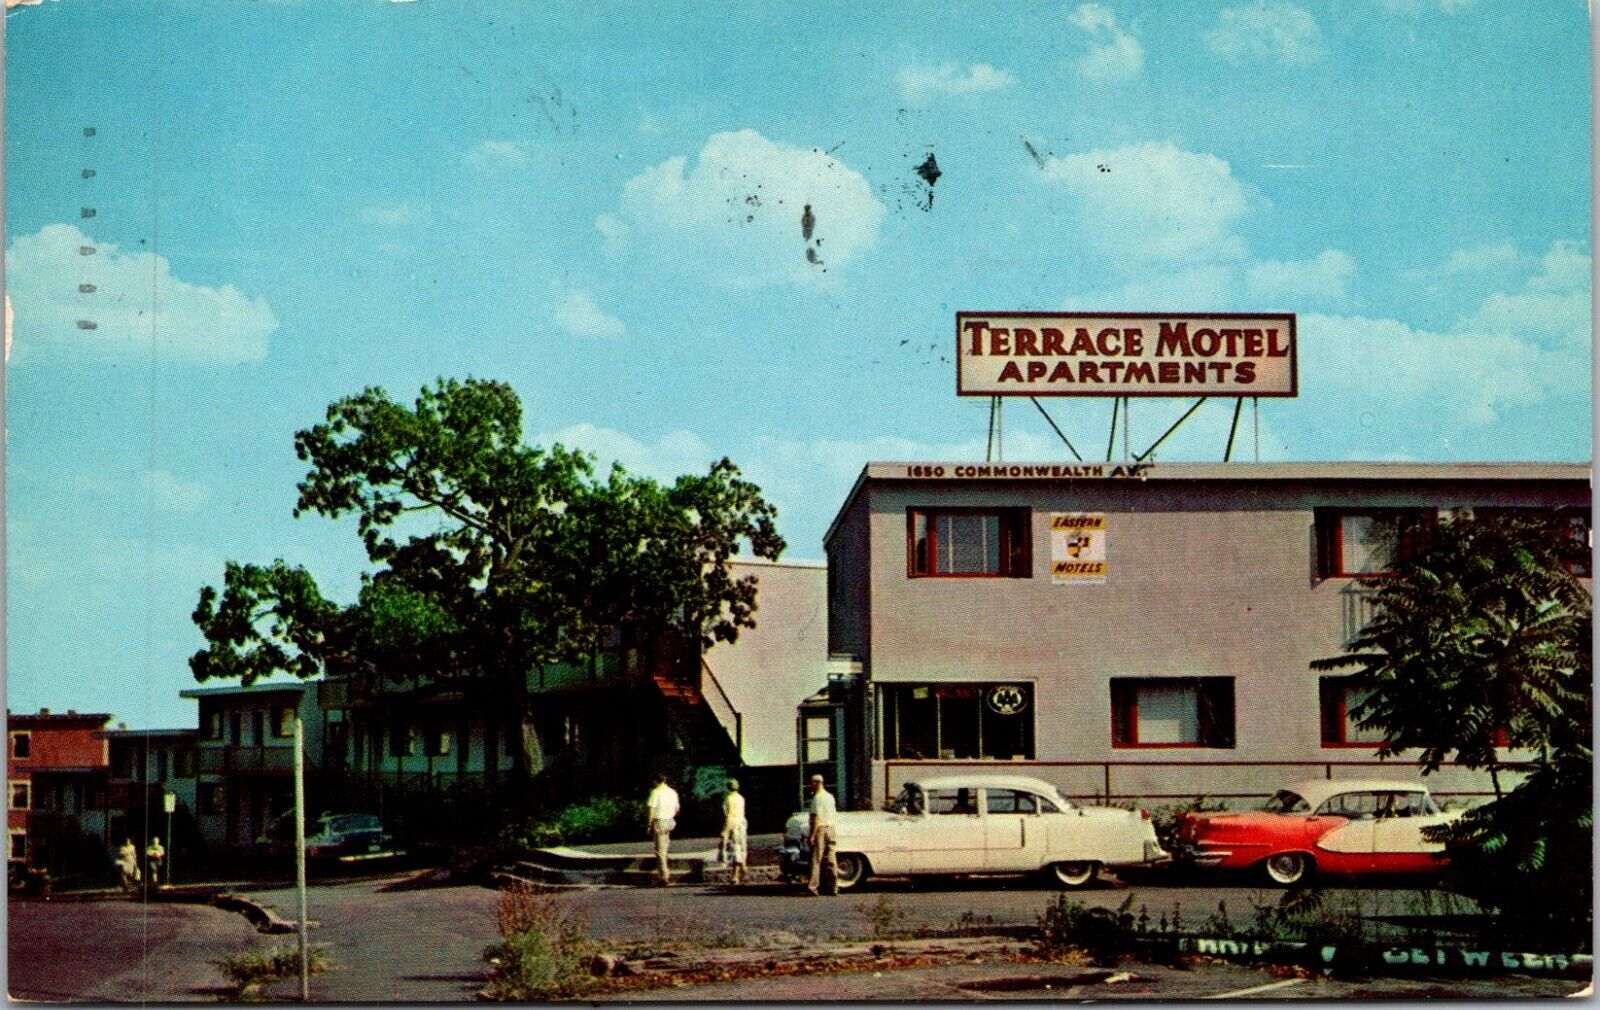 Terrace Motel Apartments Boston, Massachusetts, MA Postcard With Old Cars & Sign